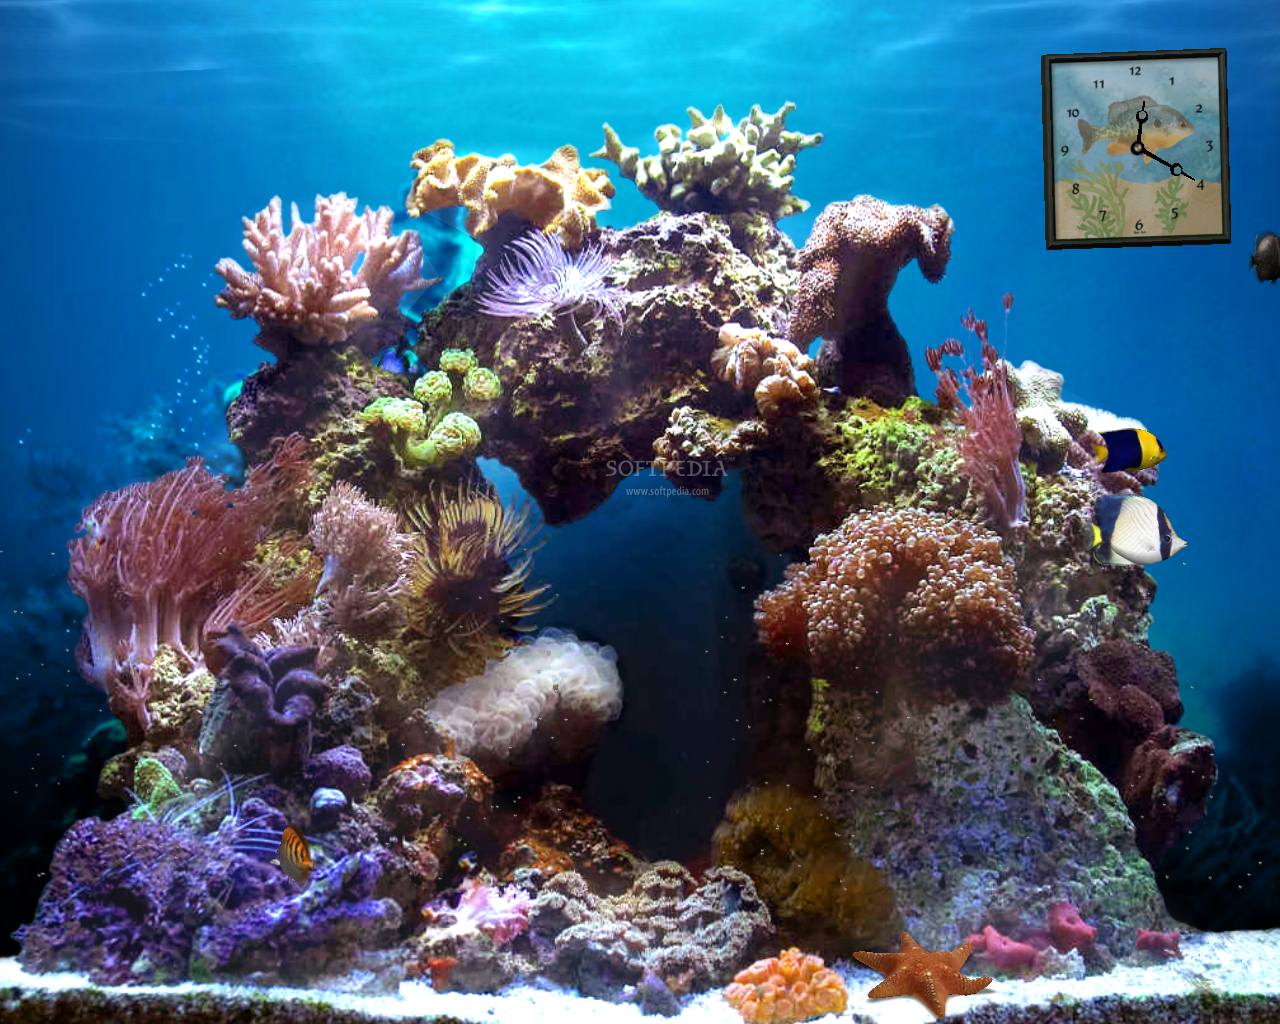 Beautiful Reef Animated Screensaver This Is The Image Displayed By